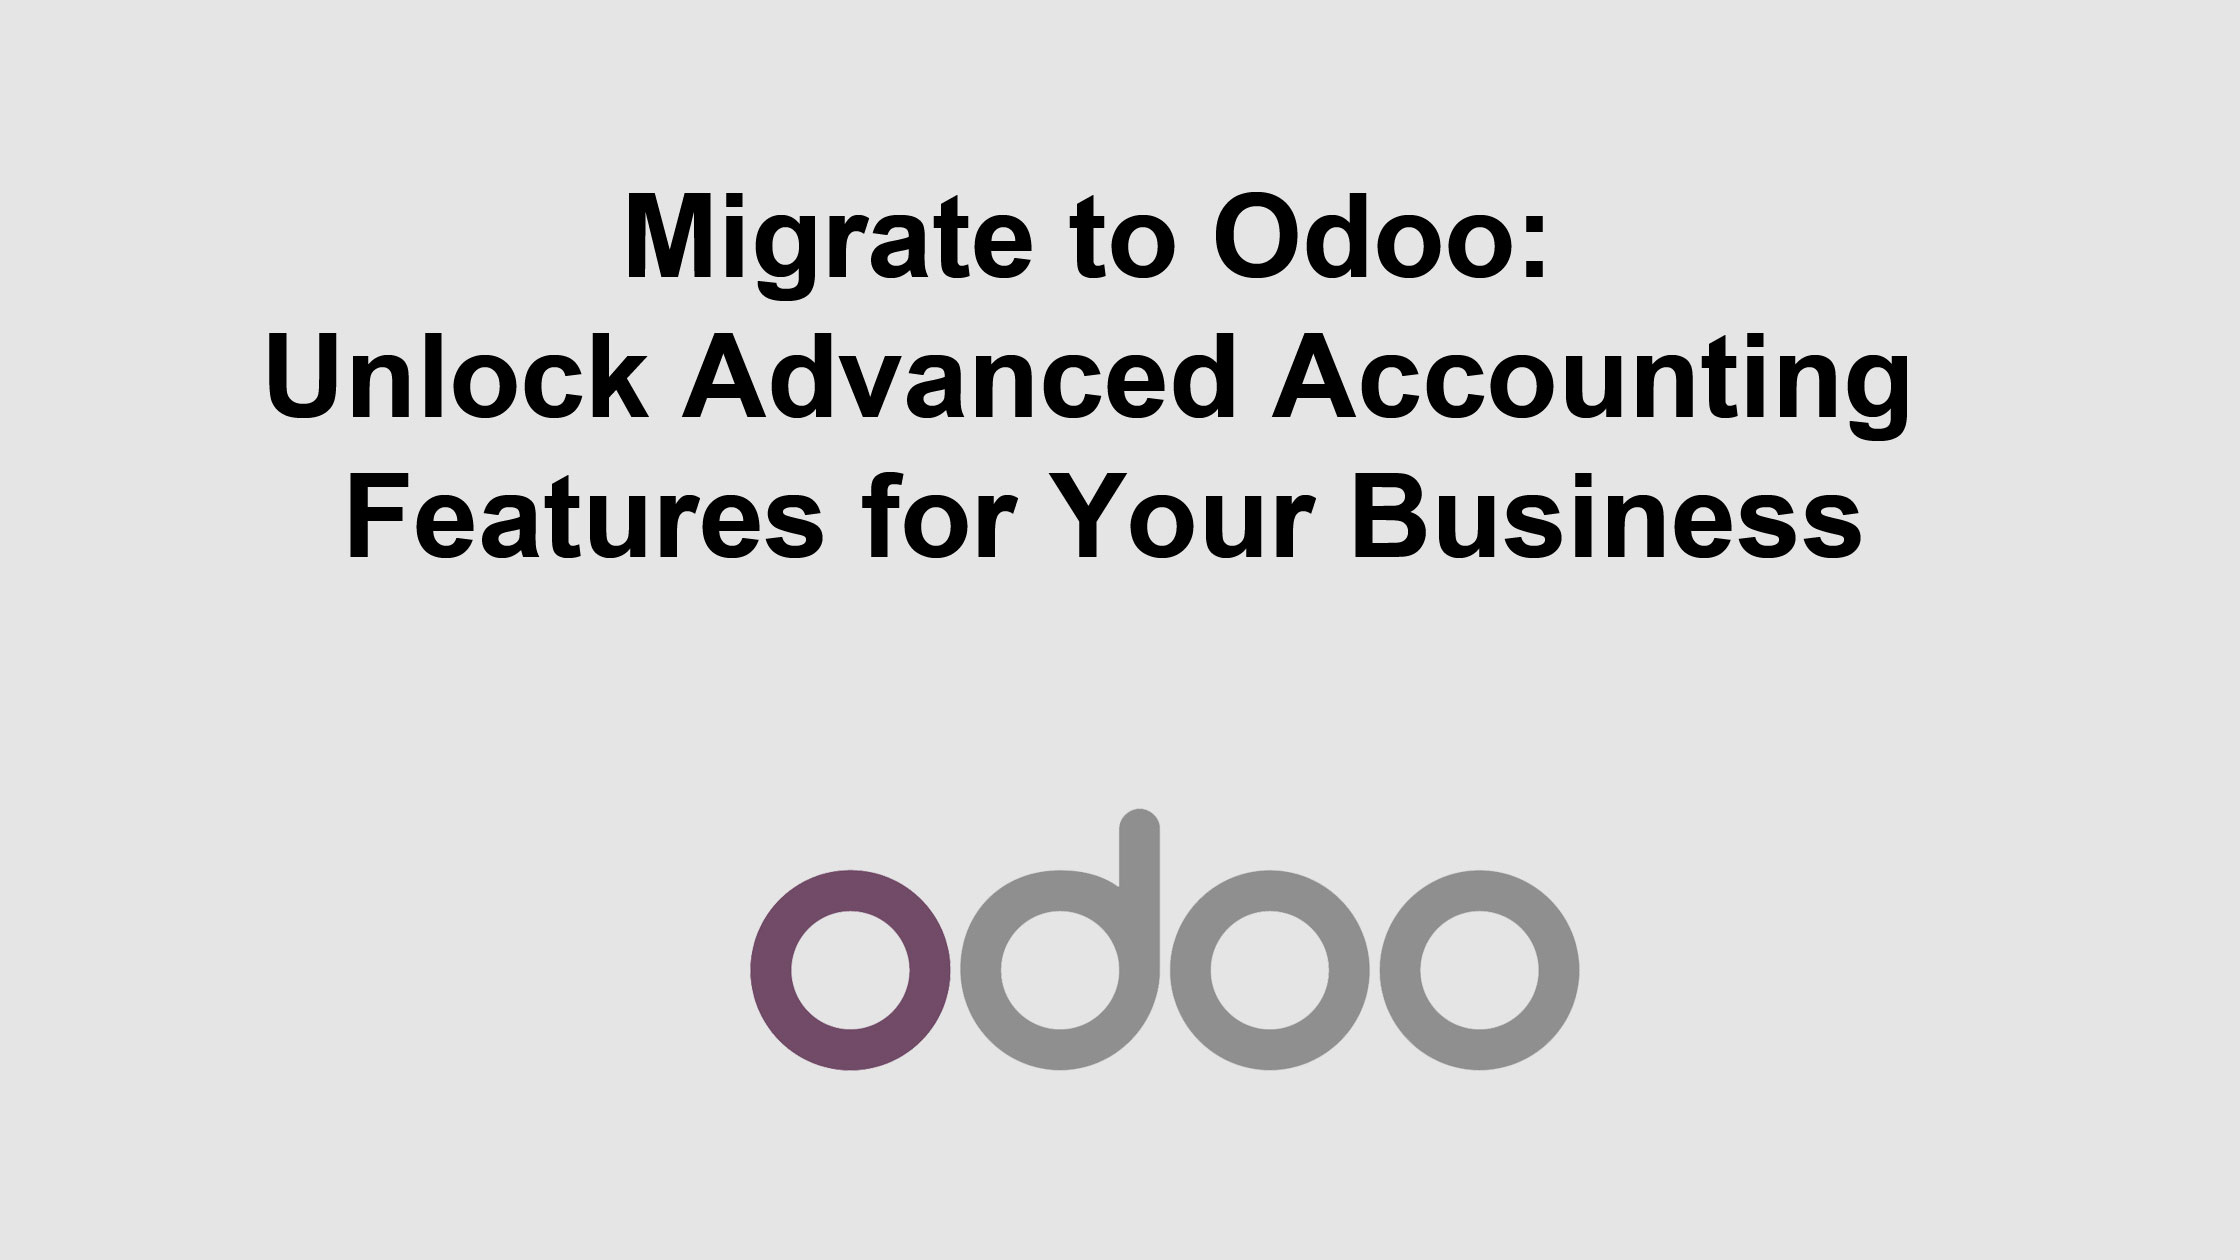 Migrate to Odoo: Unlock Advanced Accounting Features for Your Business